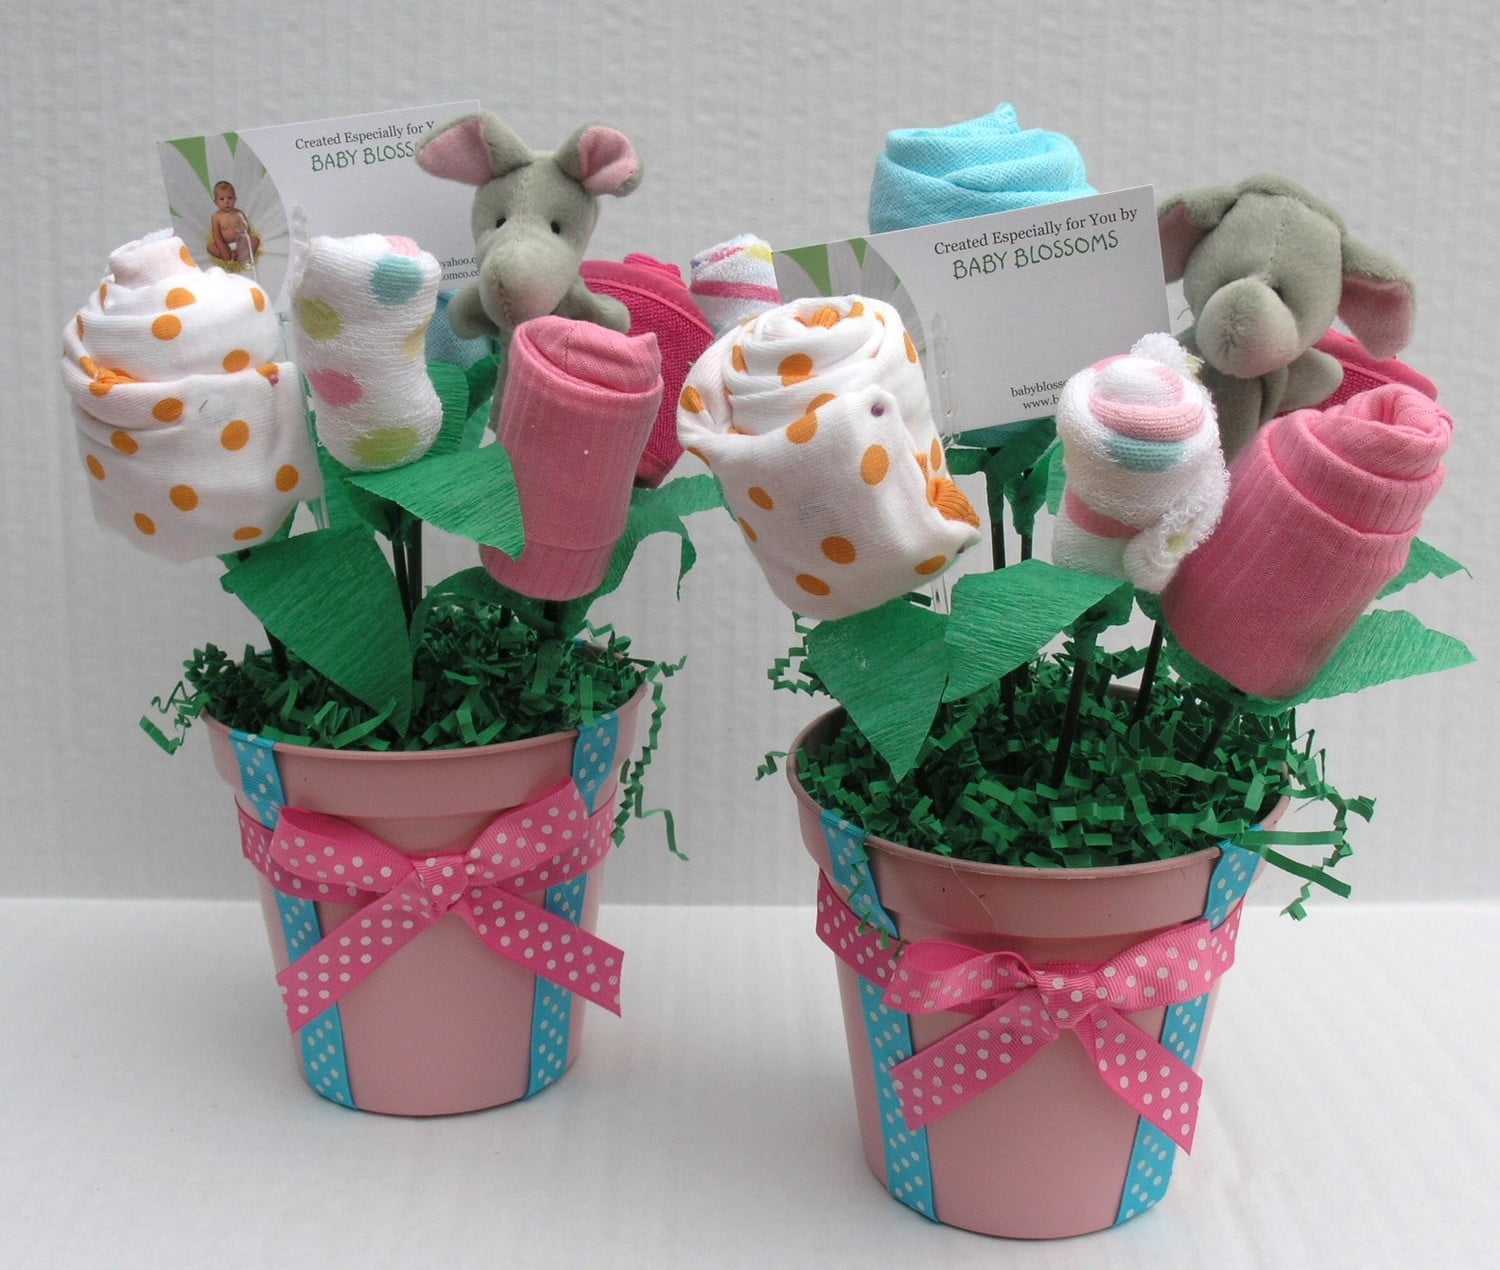 Centerpieces For Baby Shower